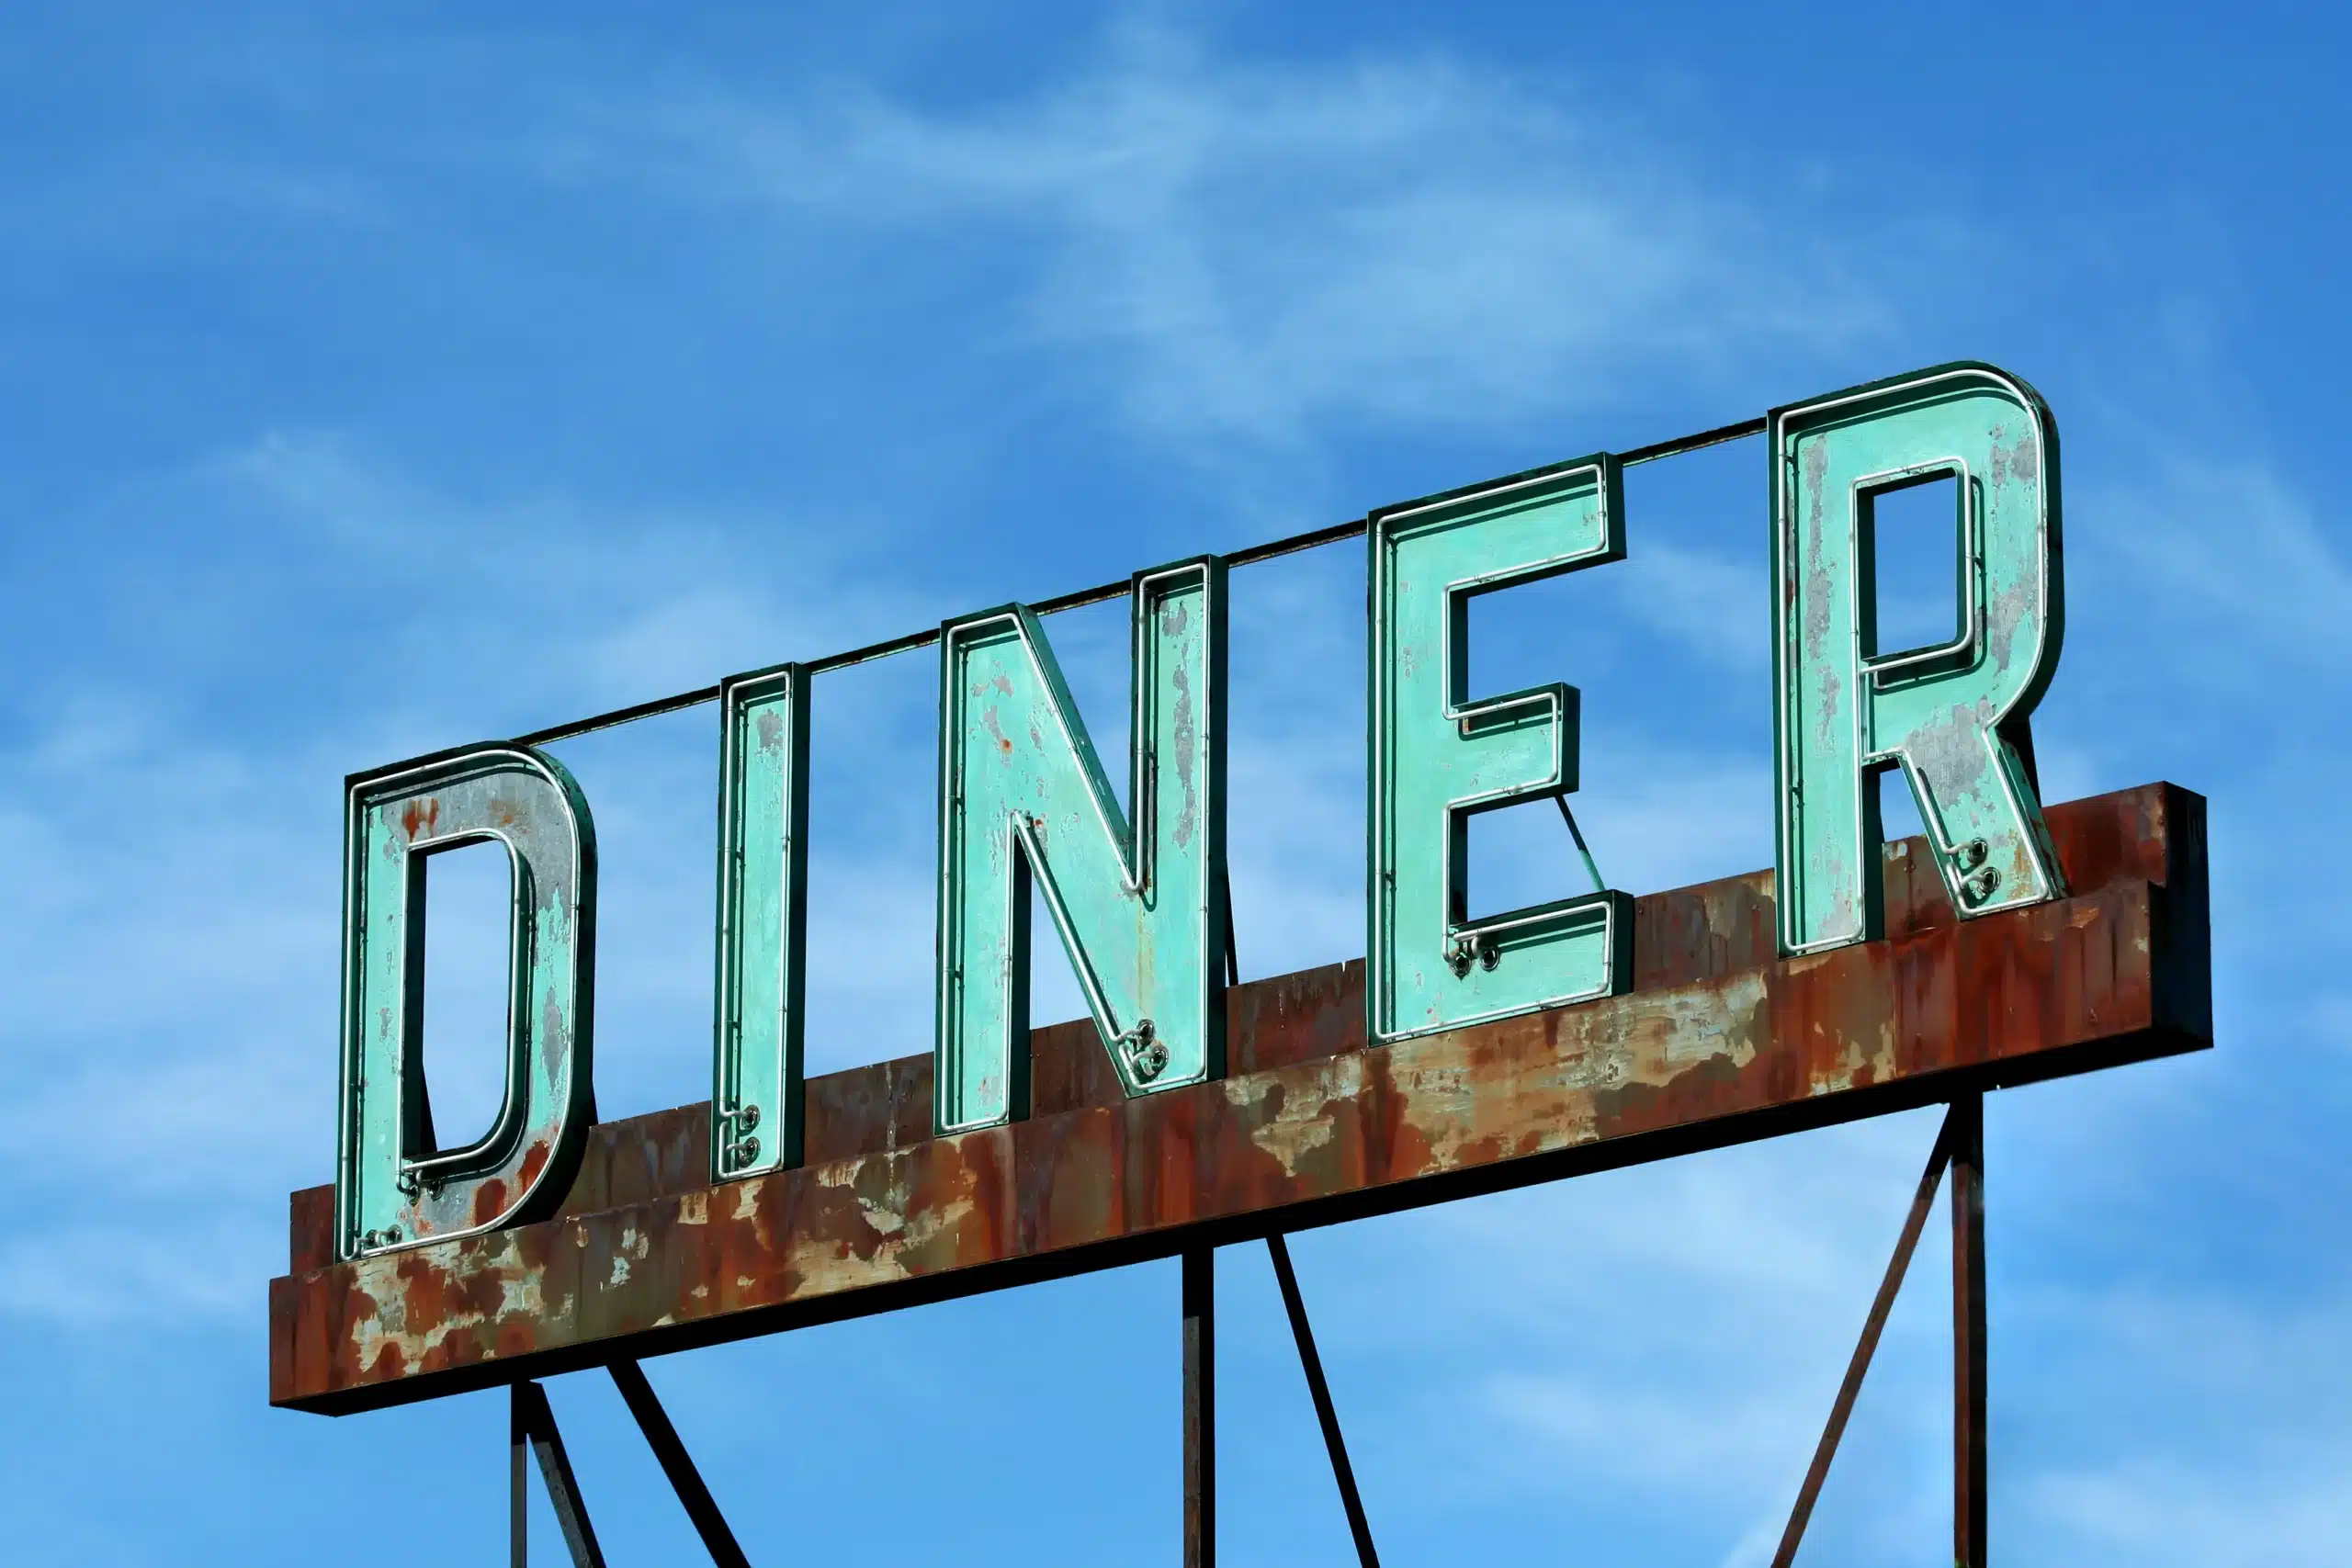 A sign on the roof of an old diner